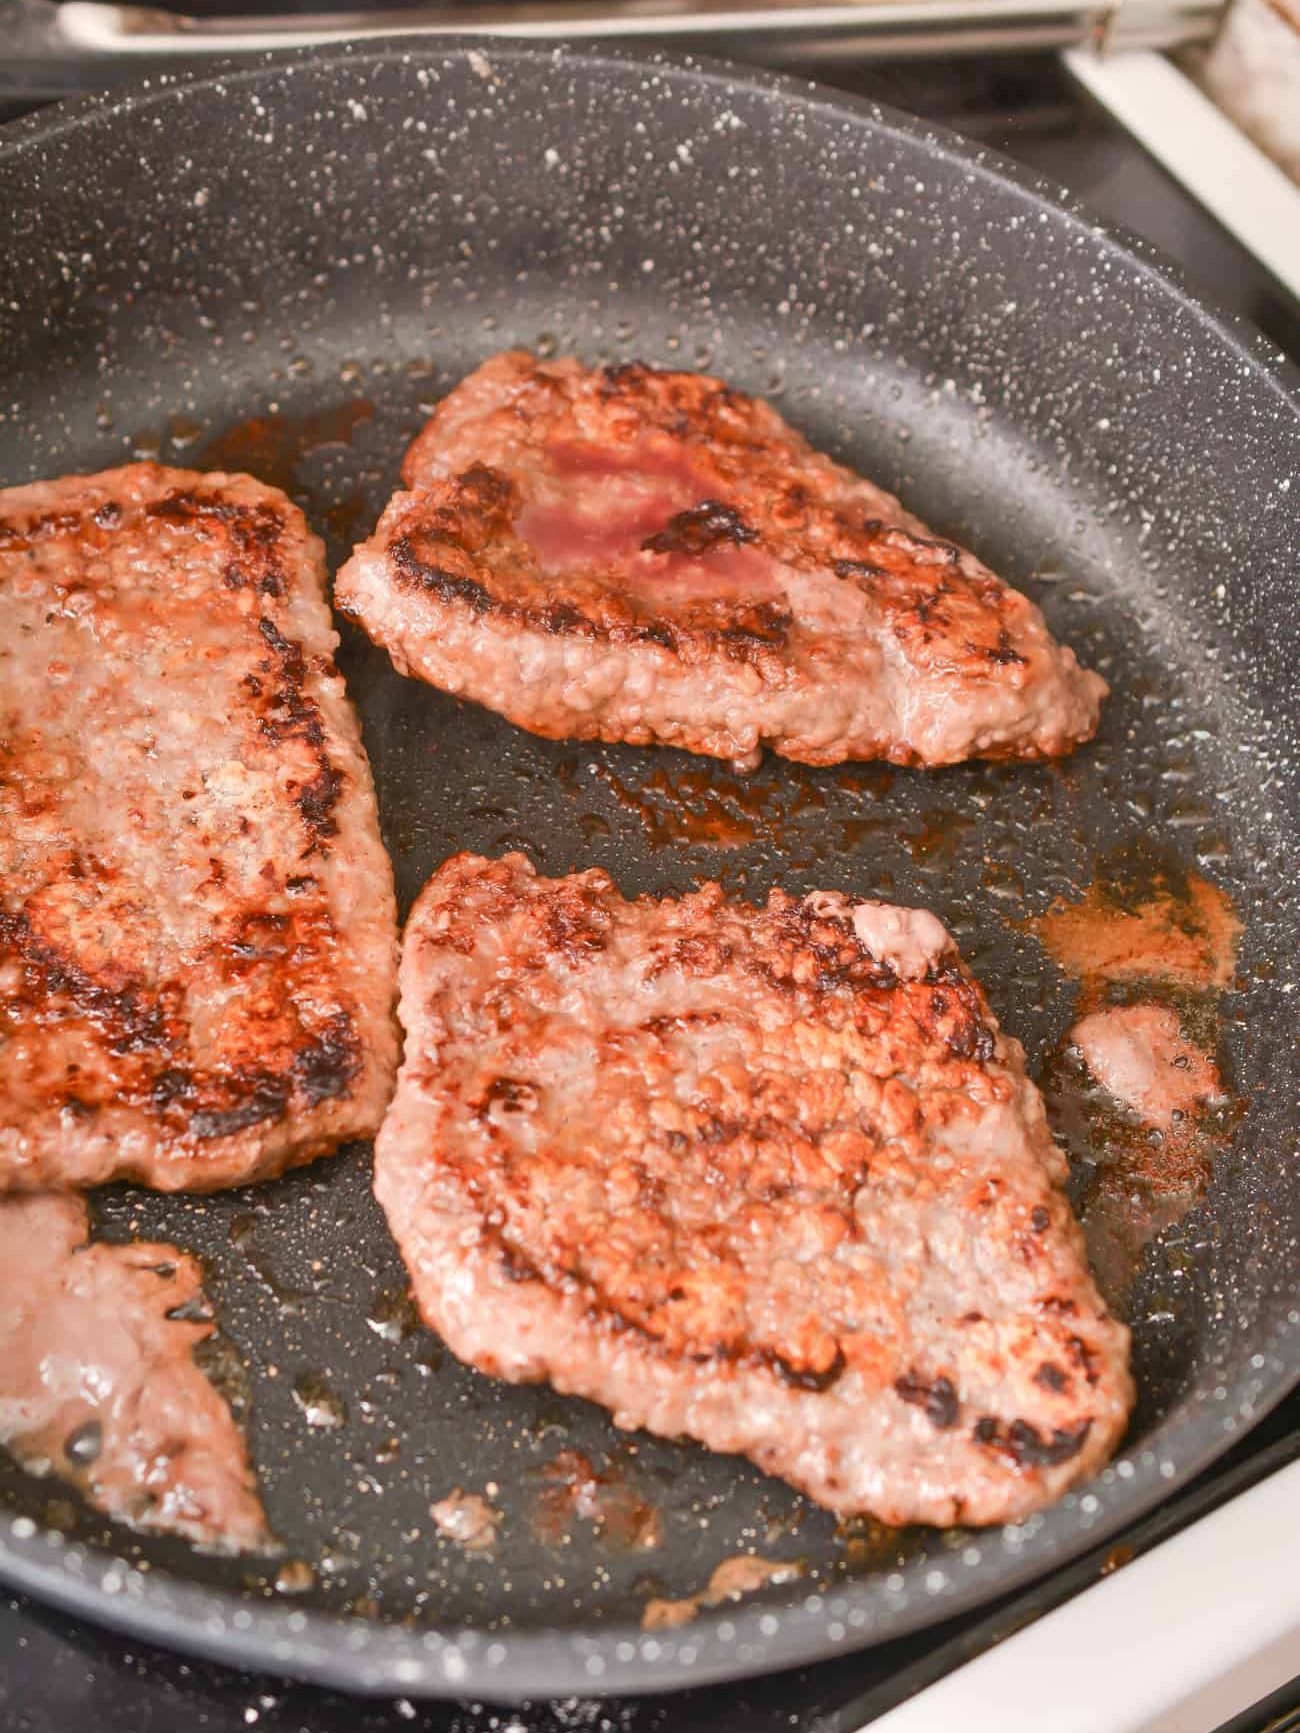 Add the steak to the heated skillet and sear on both sides evenly, cooking until your desired doneness has been reached. Set aside on a plate.